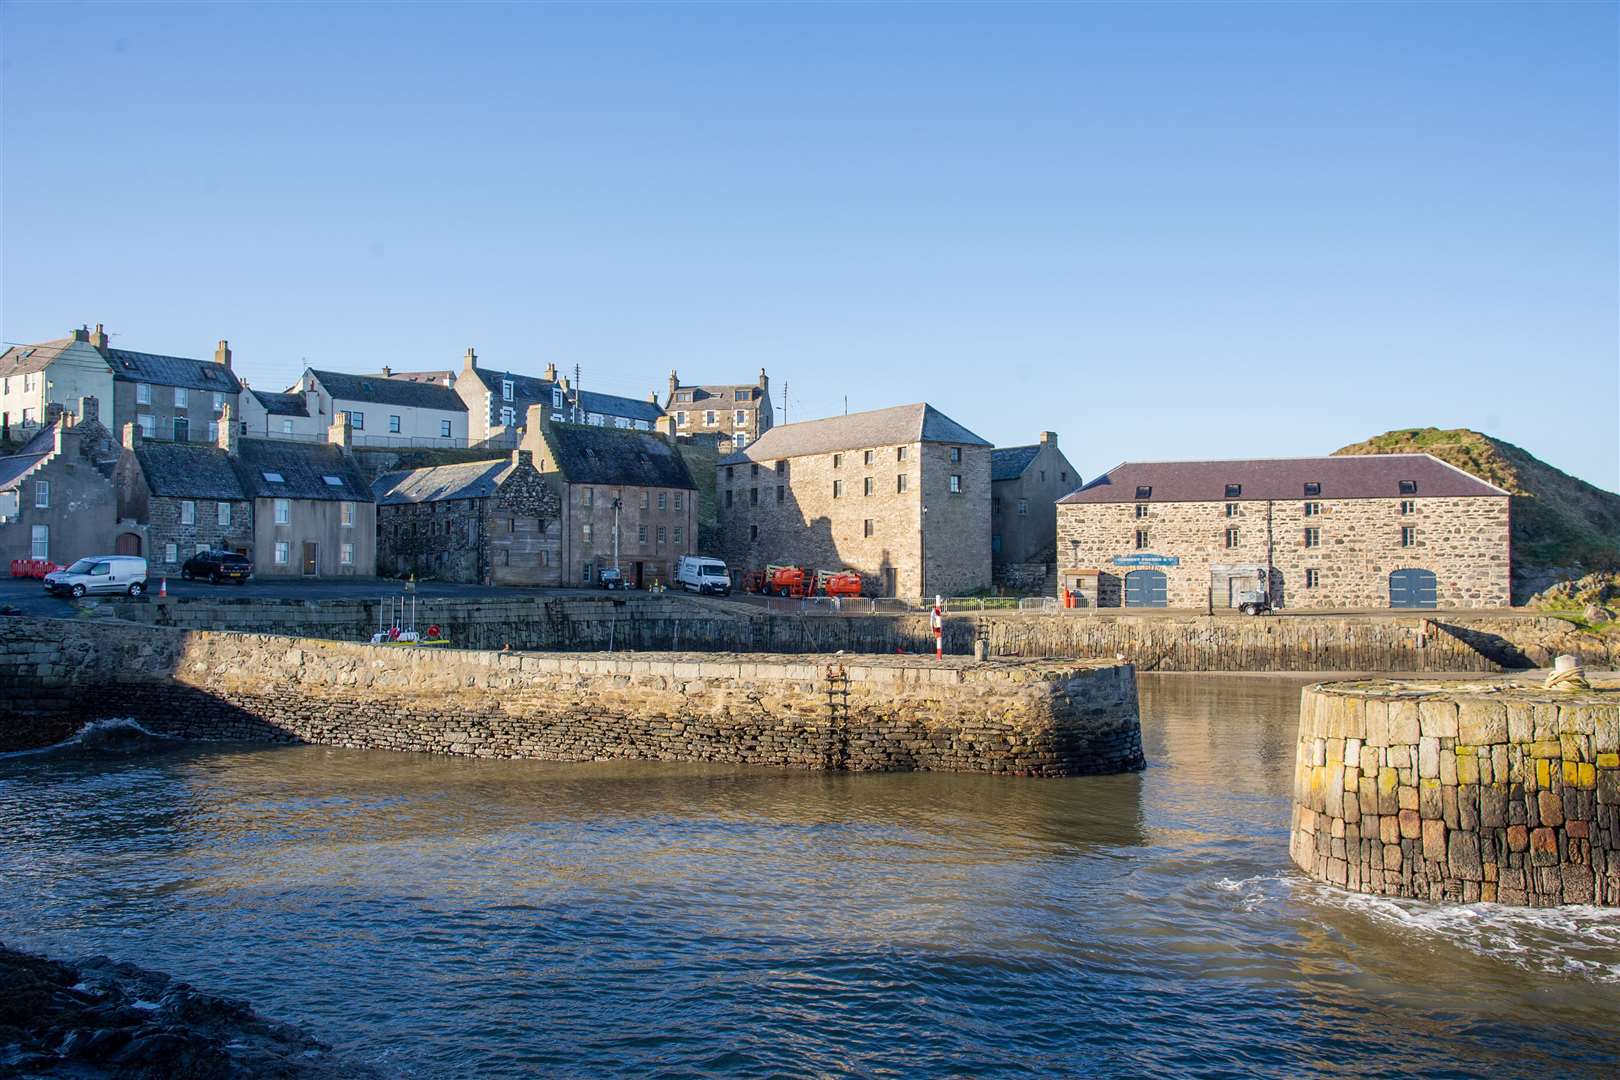 The historic harbour at Portsoy where filming took place.